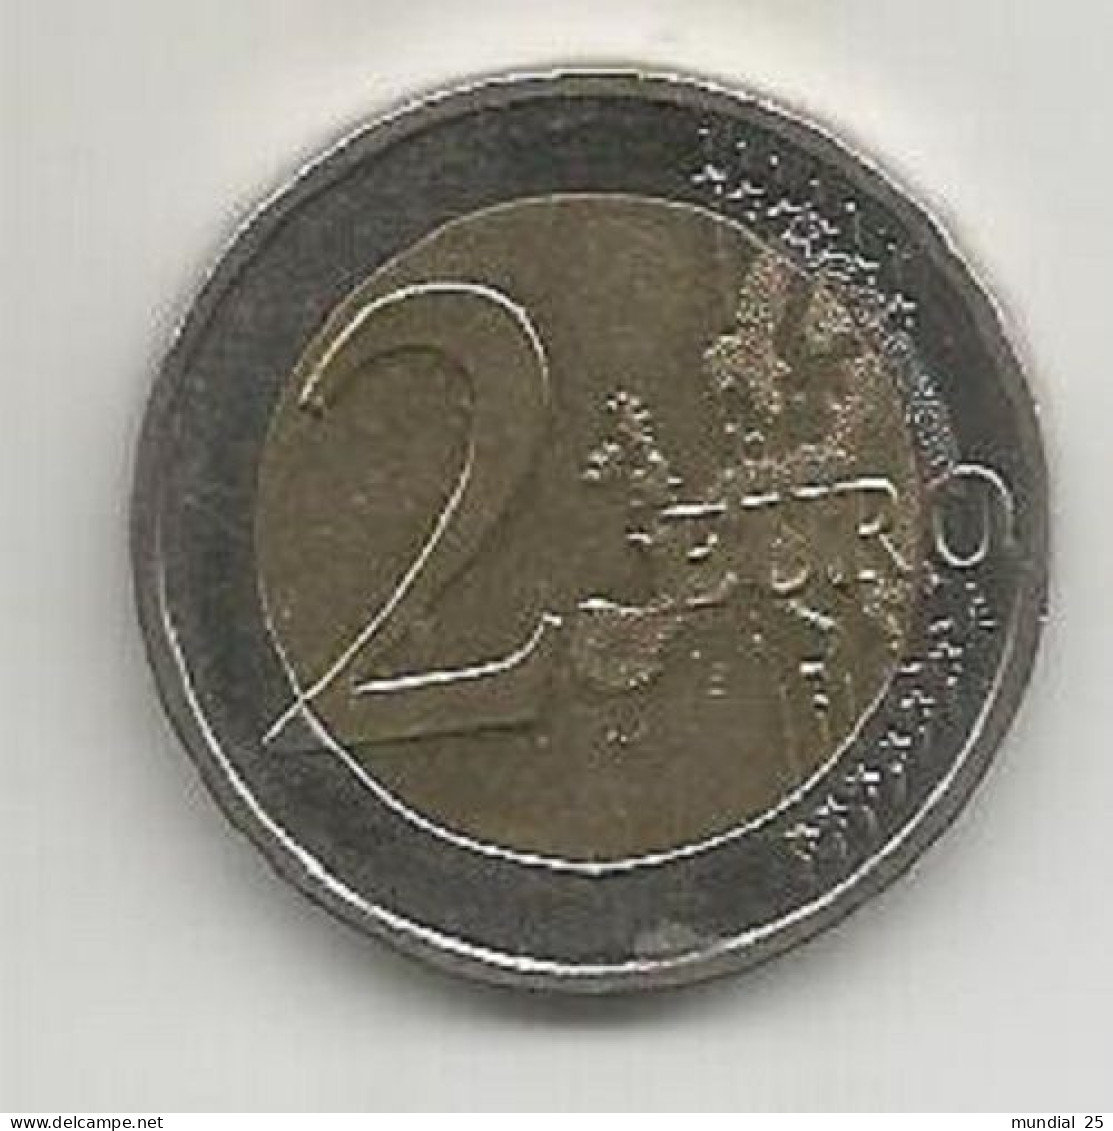 GERMANY 2 EURO 2018 (G) - BERLIN - Allemagne